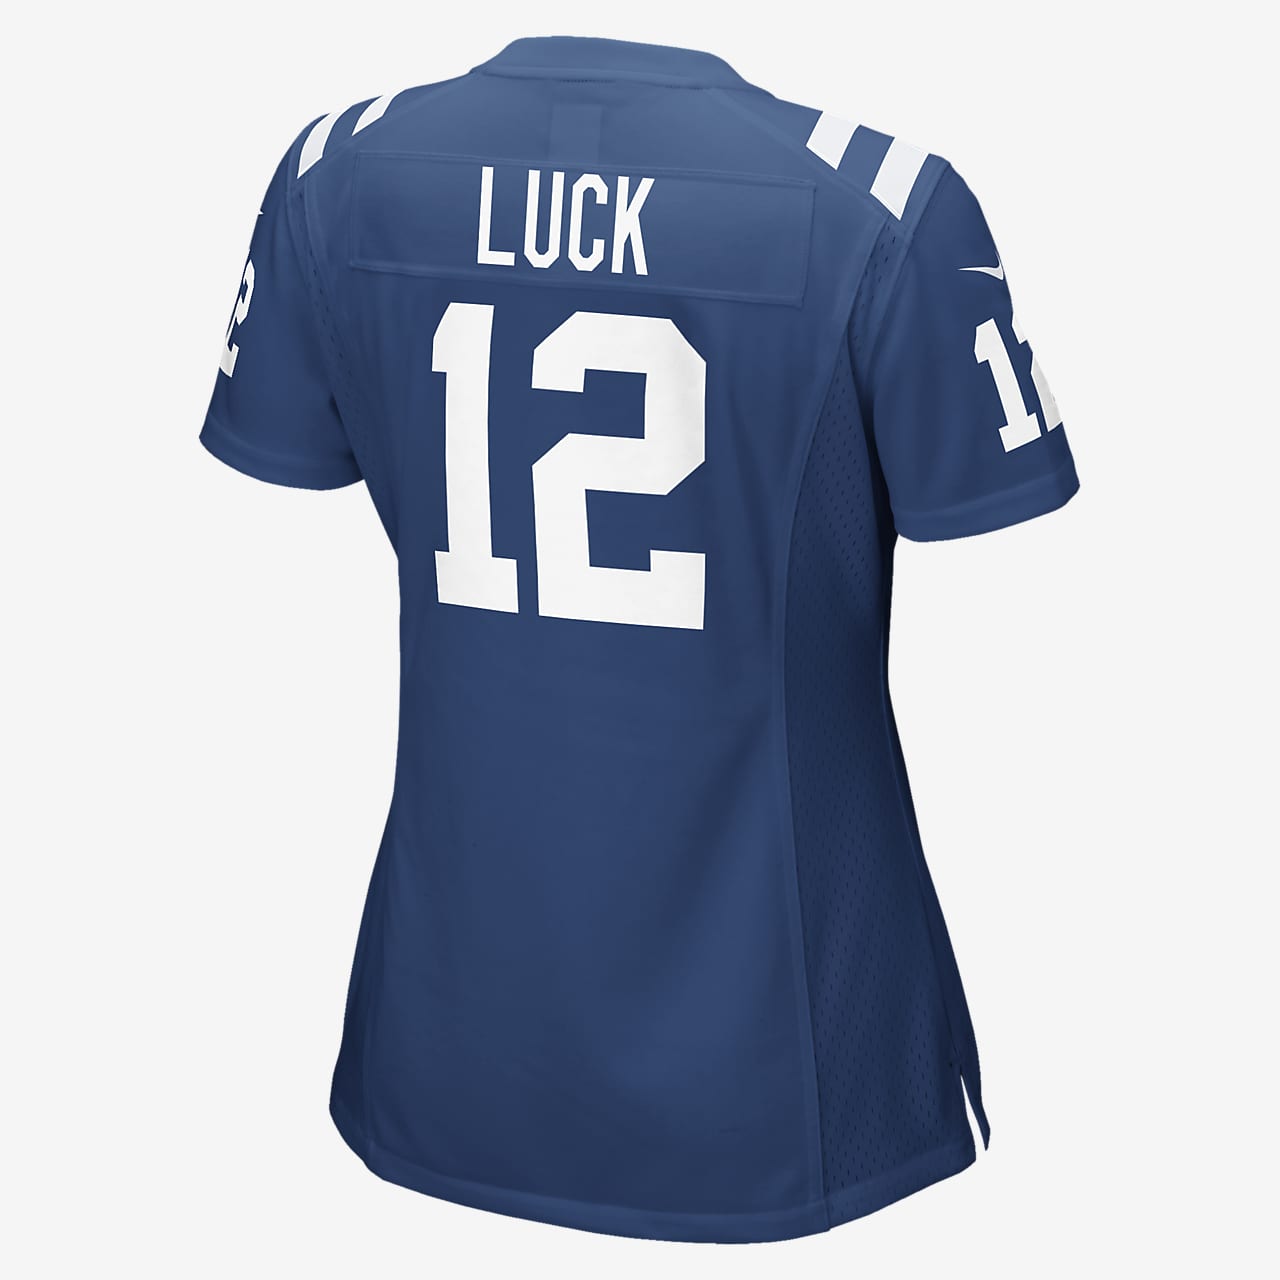 NFL Indianapolis Colts (Andrew Luck) Women's Game Football Jersey